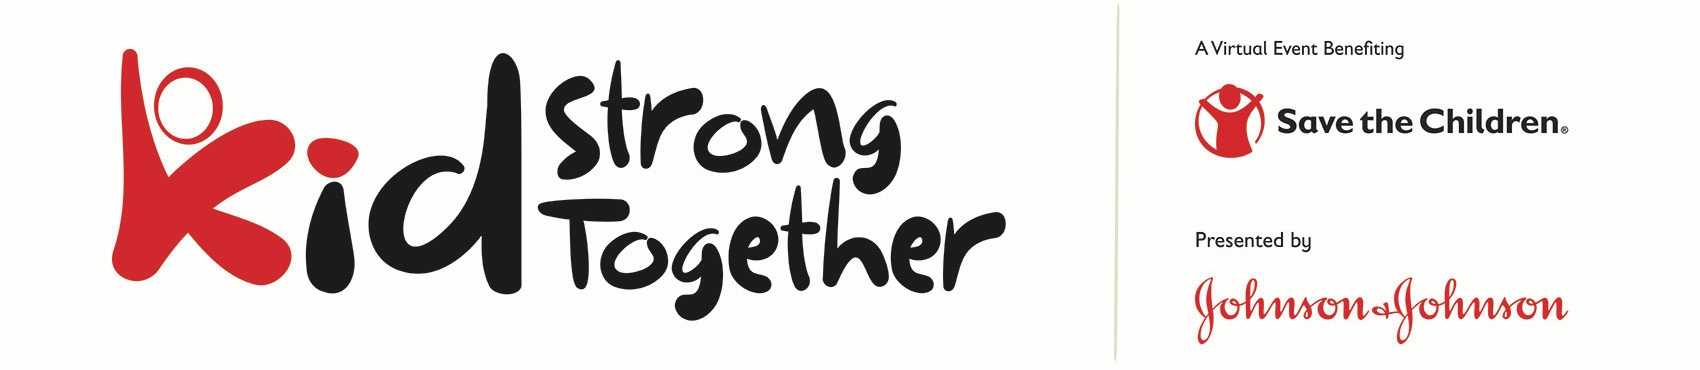 Presenting Save the Children's virtual event, Kid Strong Together.